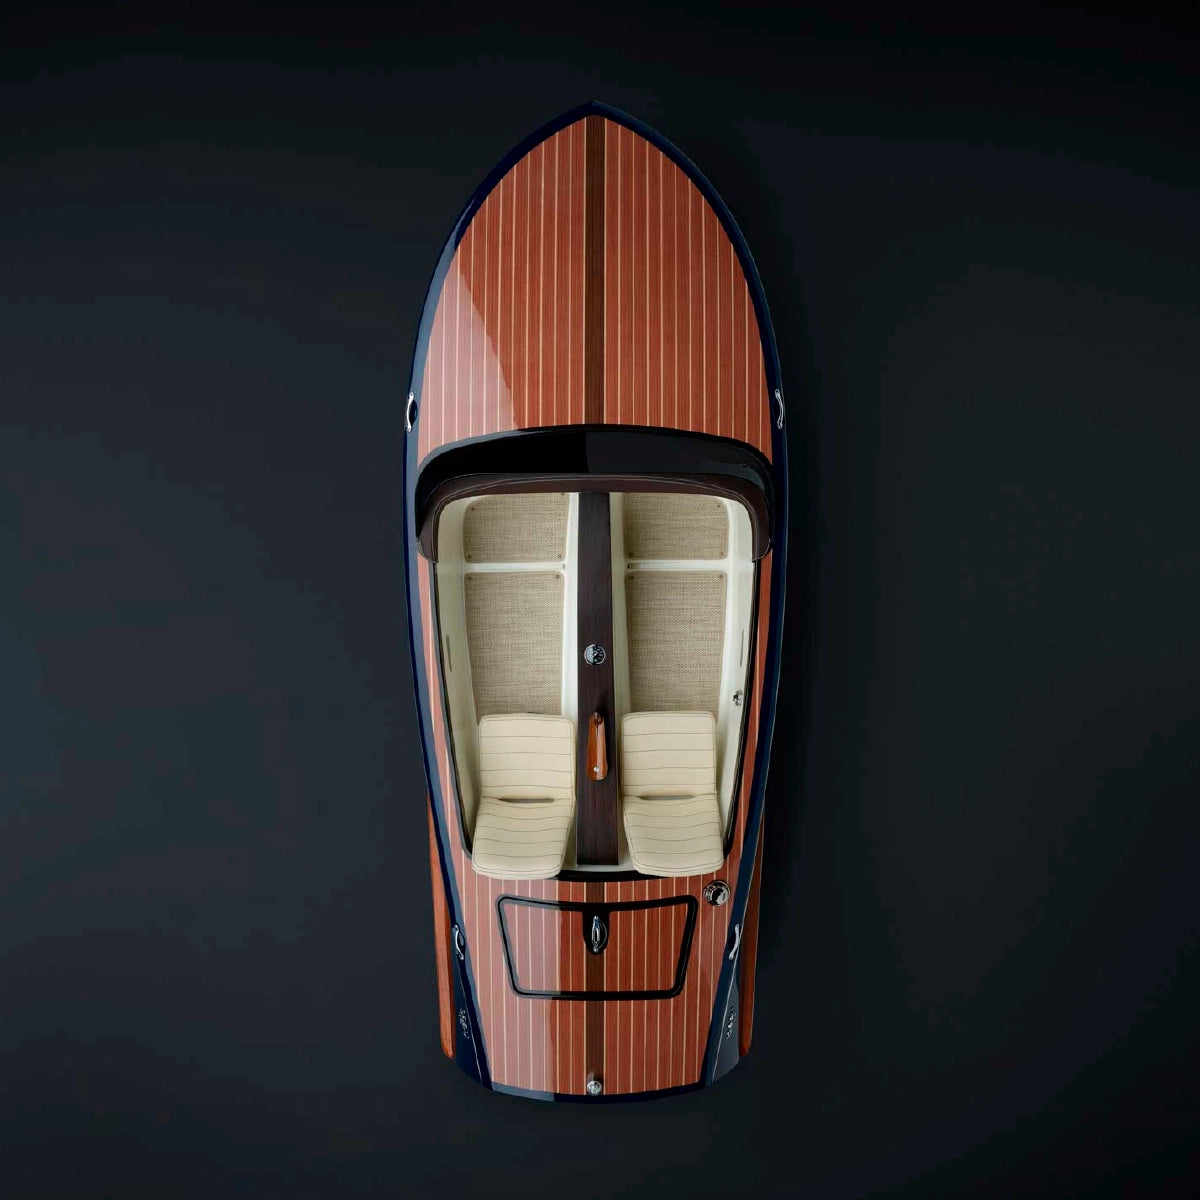 The Tahoe 14' Electric Boat